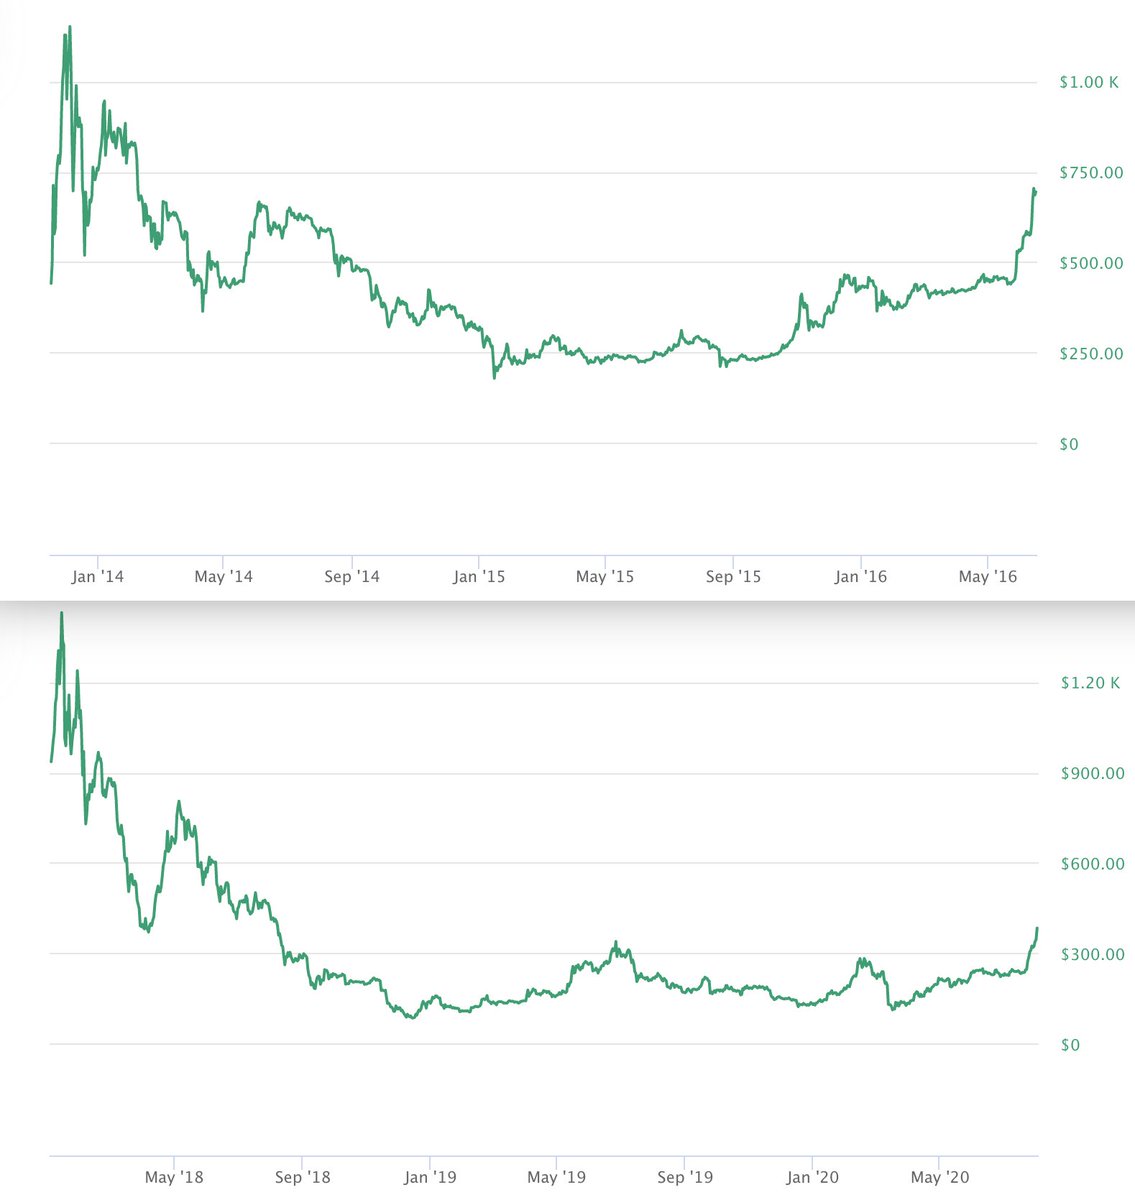 Now obviously history doesn't repeat itself but it does rhyme.We're 3-4x bottom. We're making way to 1/2 top. We're 2.5 years from ATH. Where was Bitcoin 2.5 years out from $1.2k?Remember kids, history doesn't repeat itself. DeFi is different. 